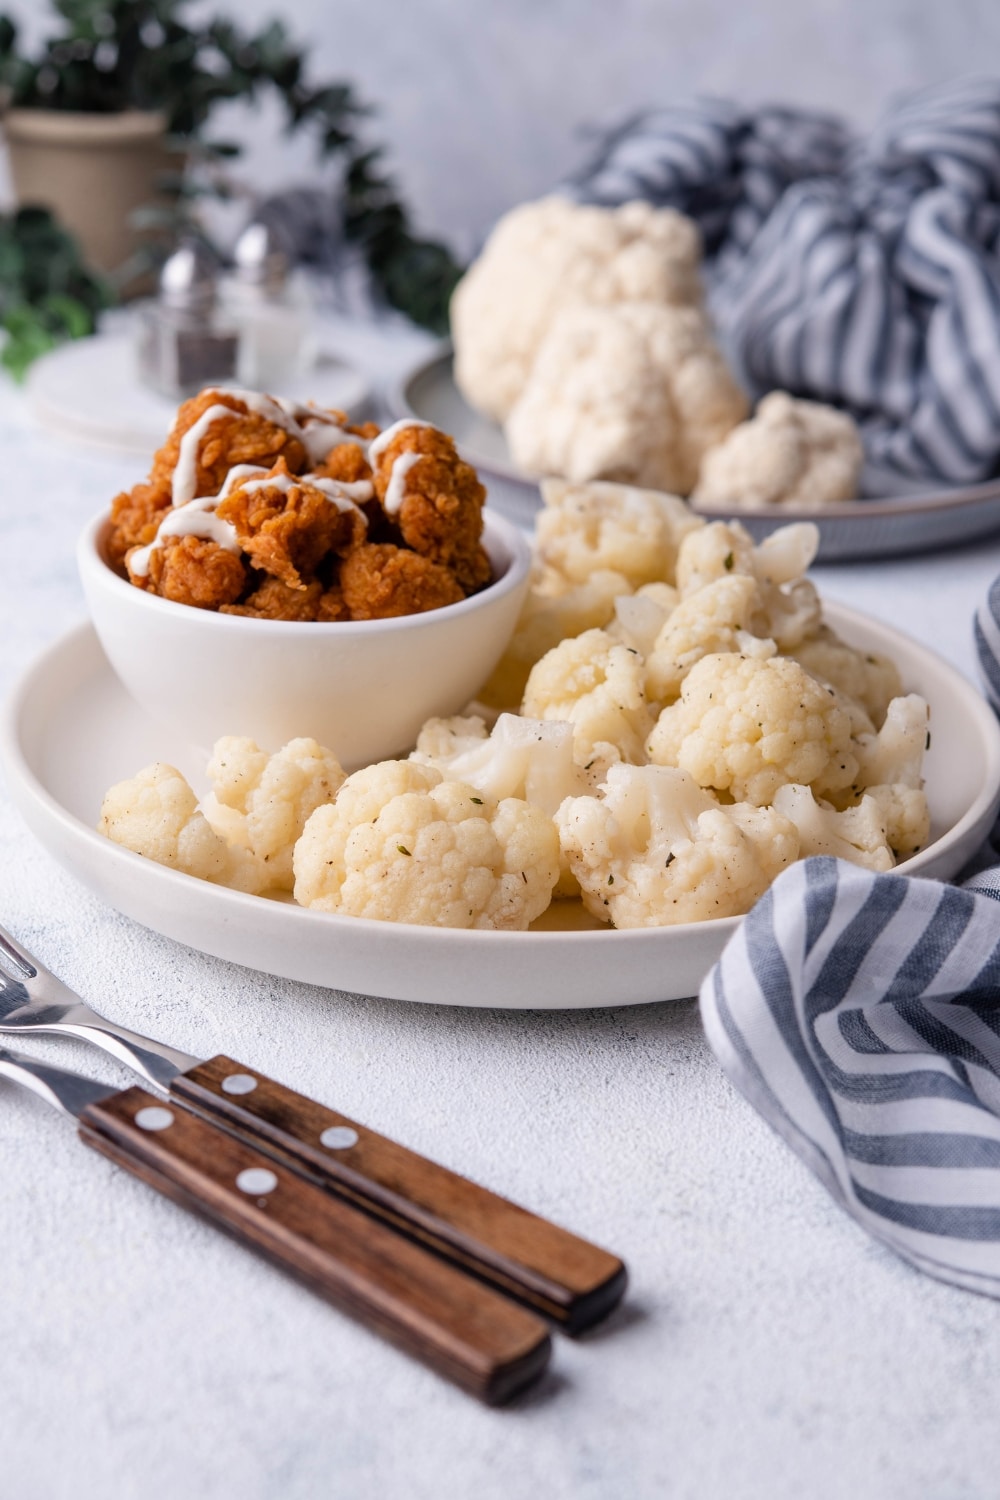 Sauteed cauliflower florets on a white plate with a small bowl of fried chicken drizzled with white sauce. Part of a pair of forks with wooden handles is in front of the plate and behind it is a plate of raw cauliflower and a pair of salt and pepper shakers.